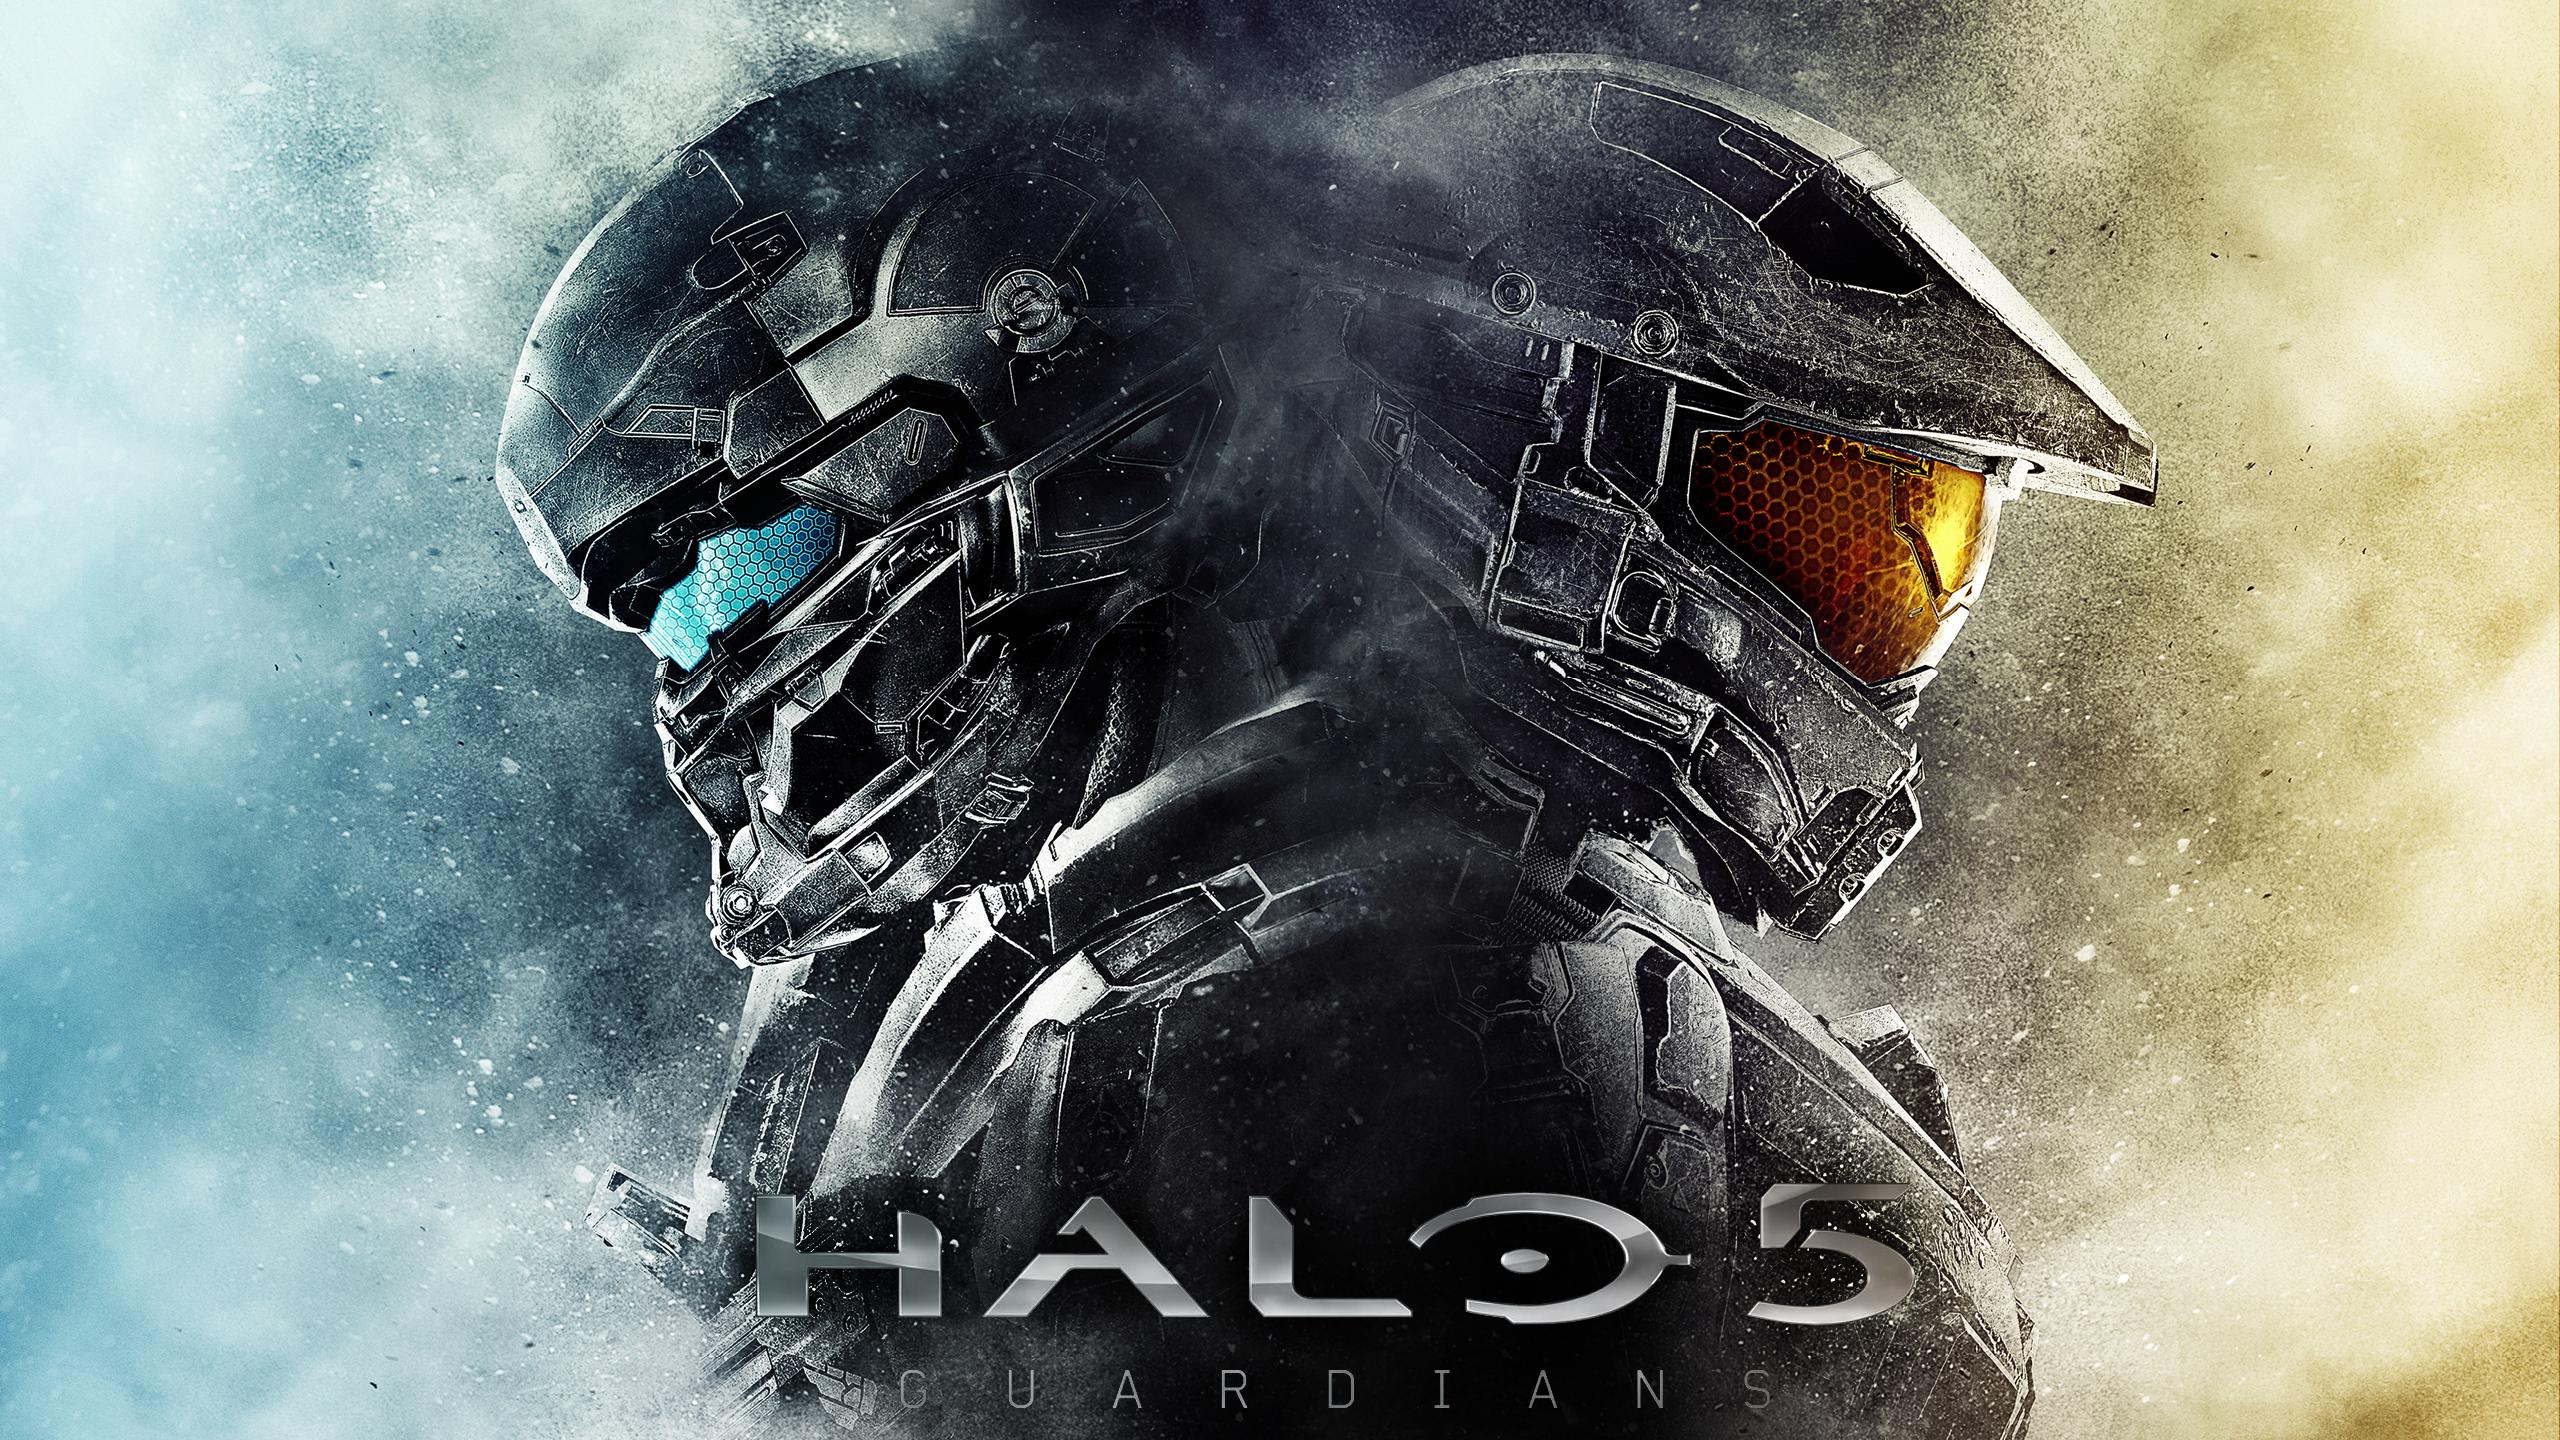 Epic Halo Guardians E3 Style Wallpaper By Drax122 High Res